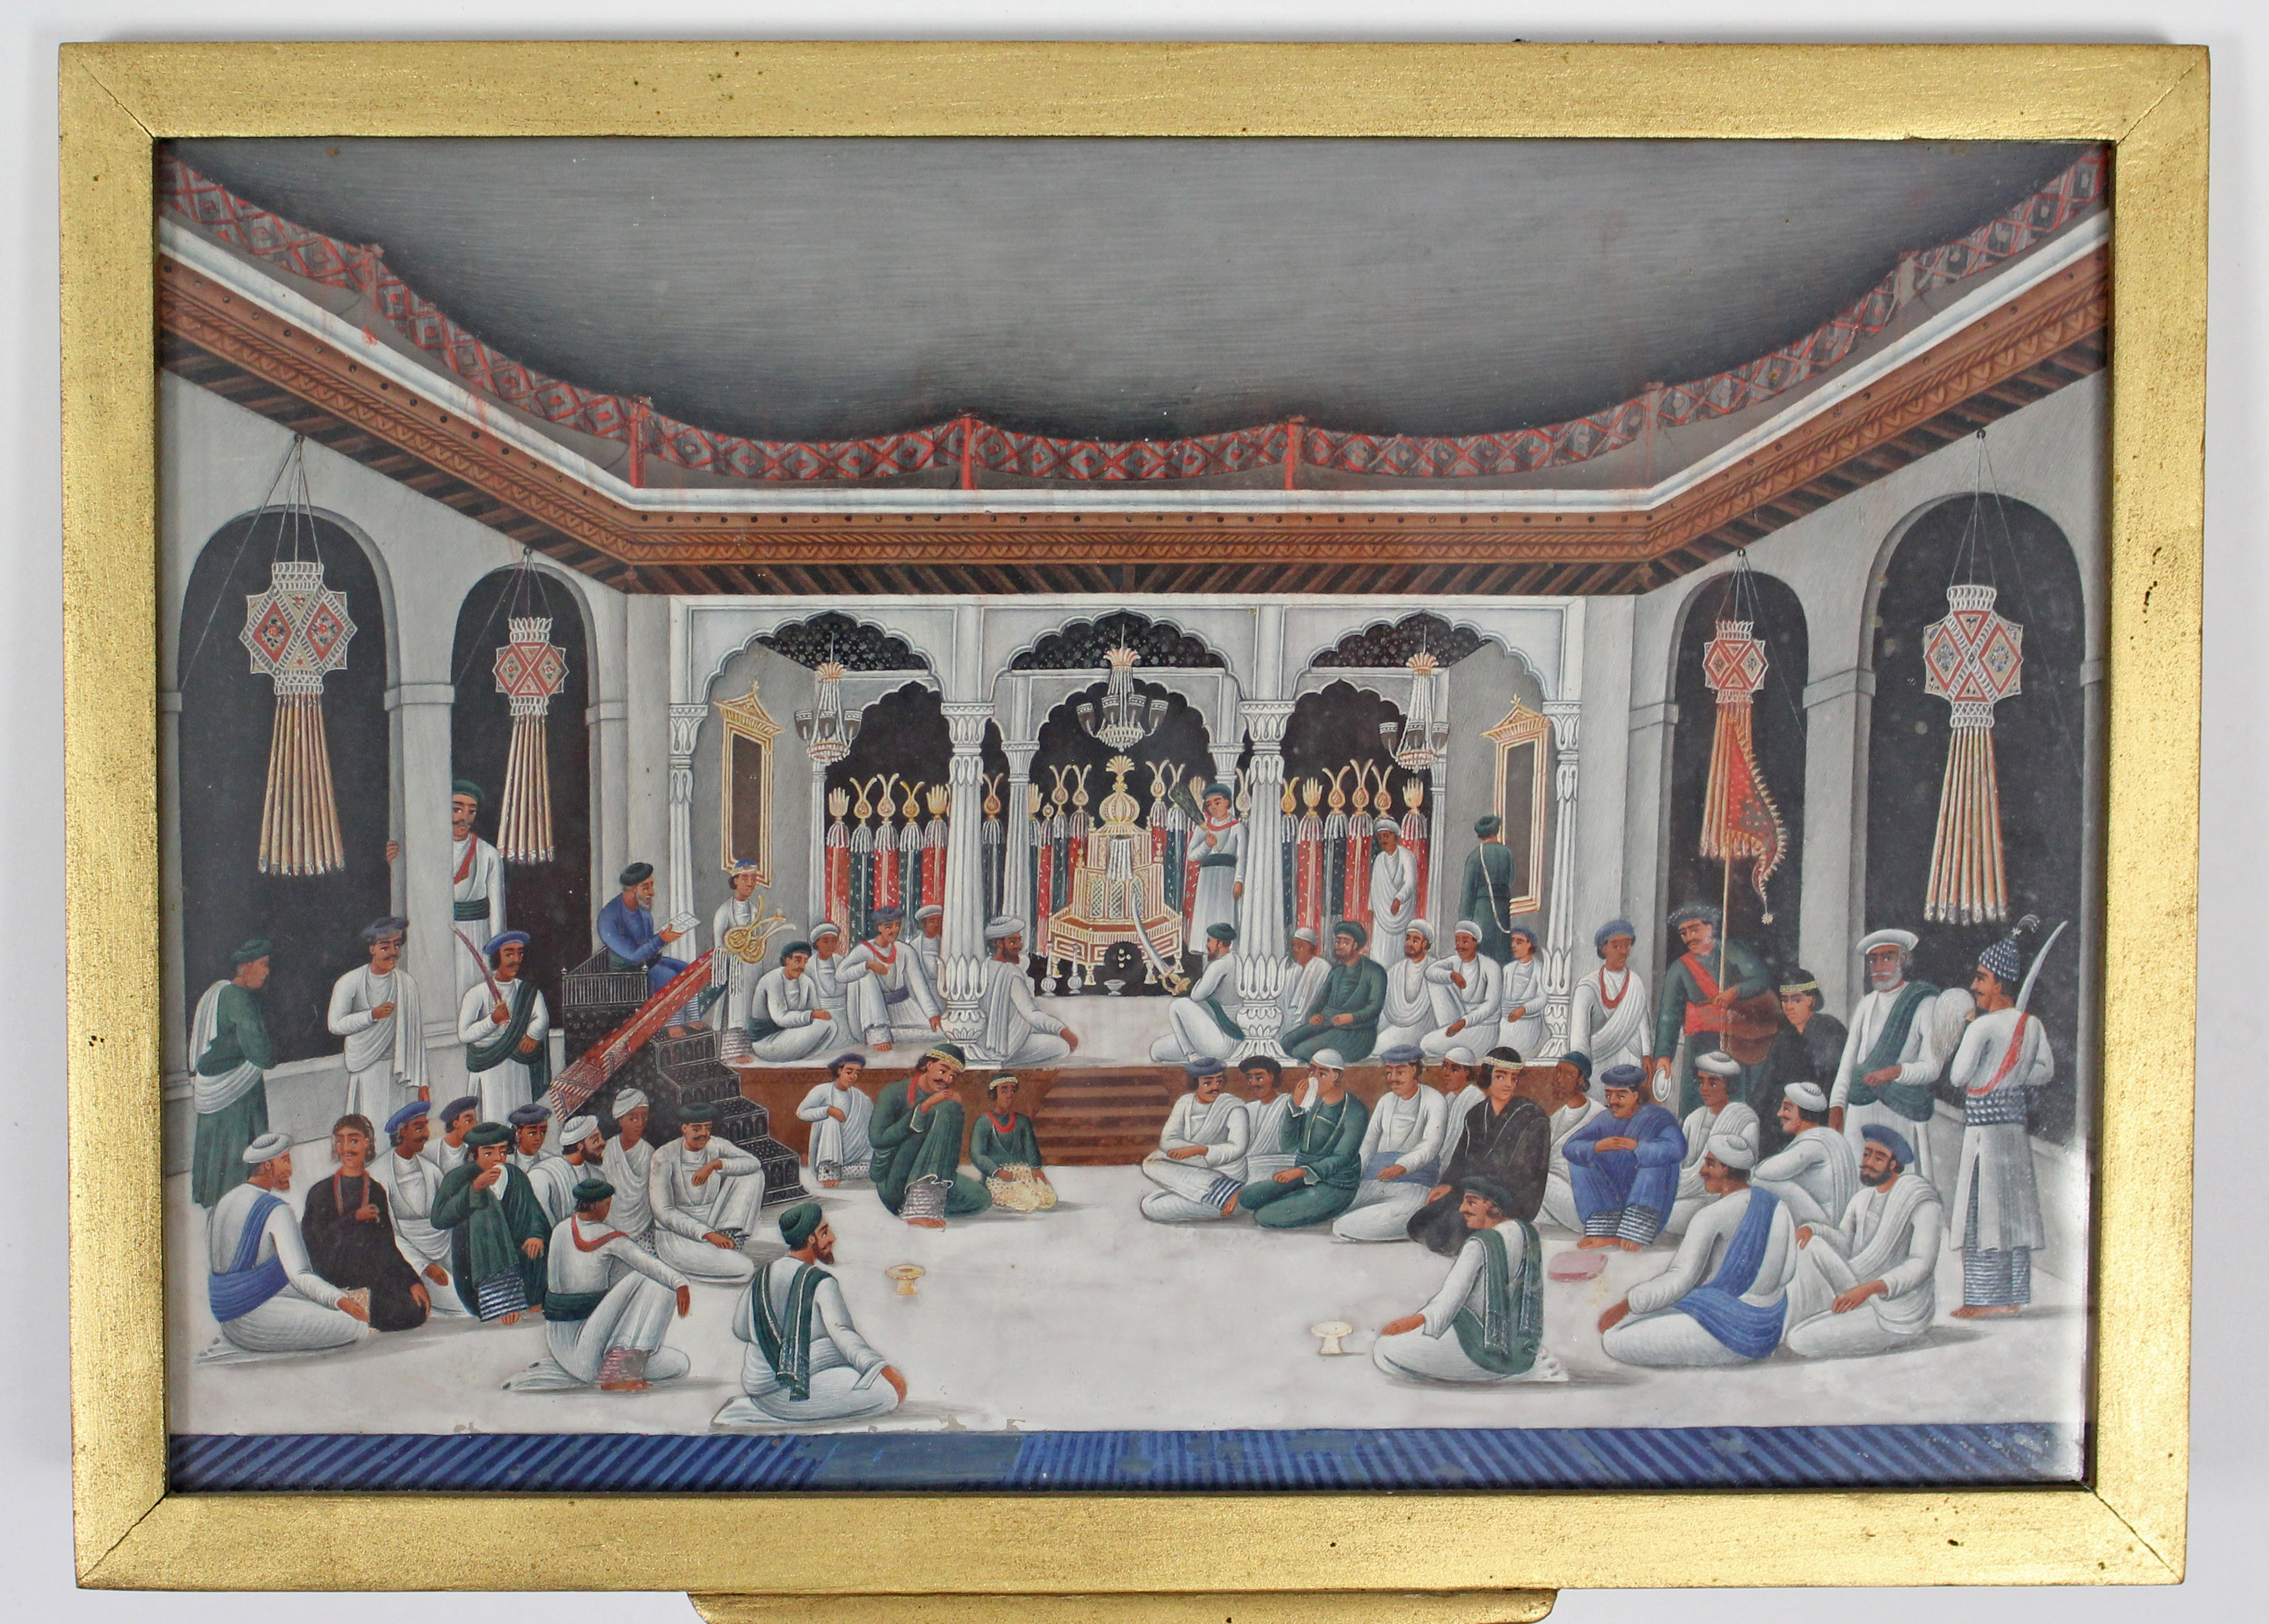 A 19th century Indian gouache painting on Mica of a ceremonial figure group in a temple, 6¾” x - Image 2 of 2